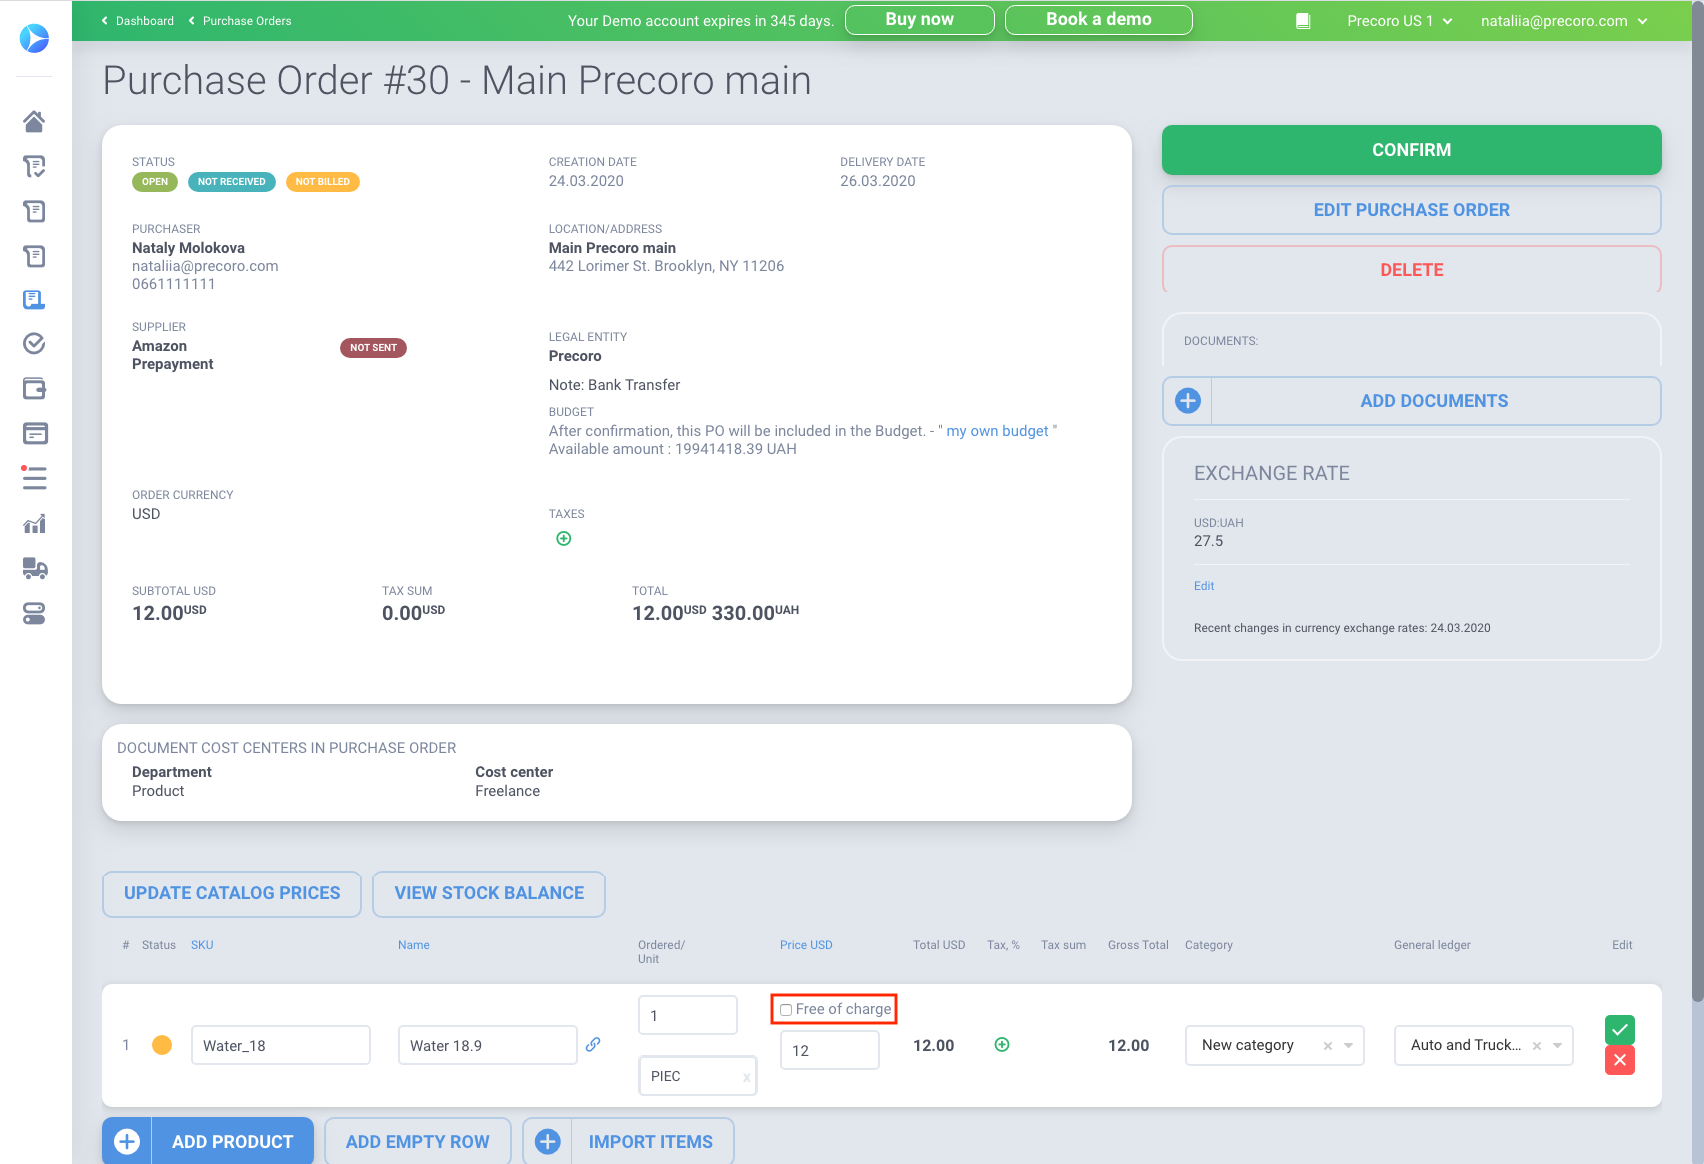 adding free items to the purchase order